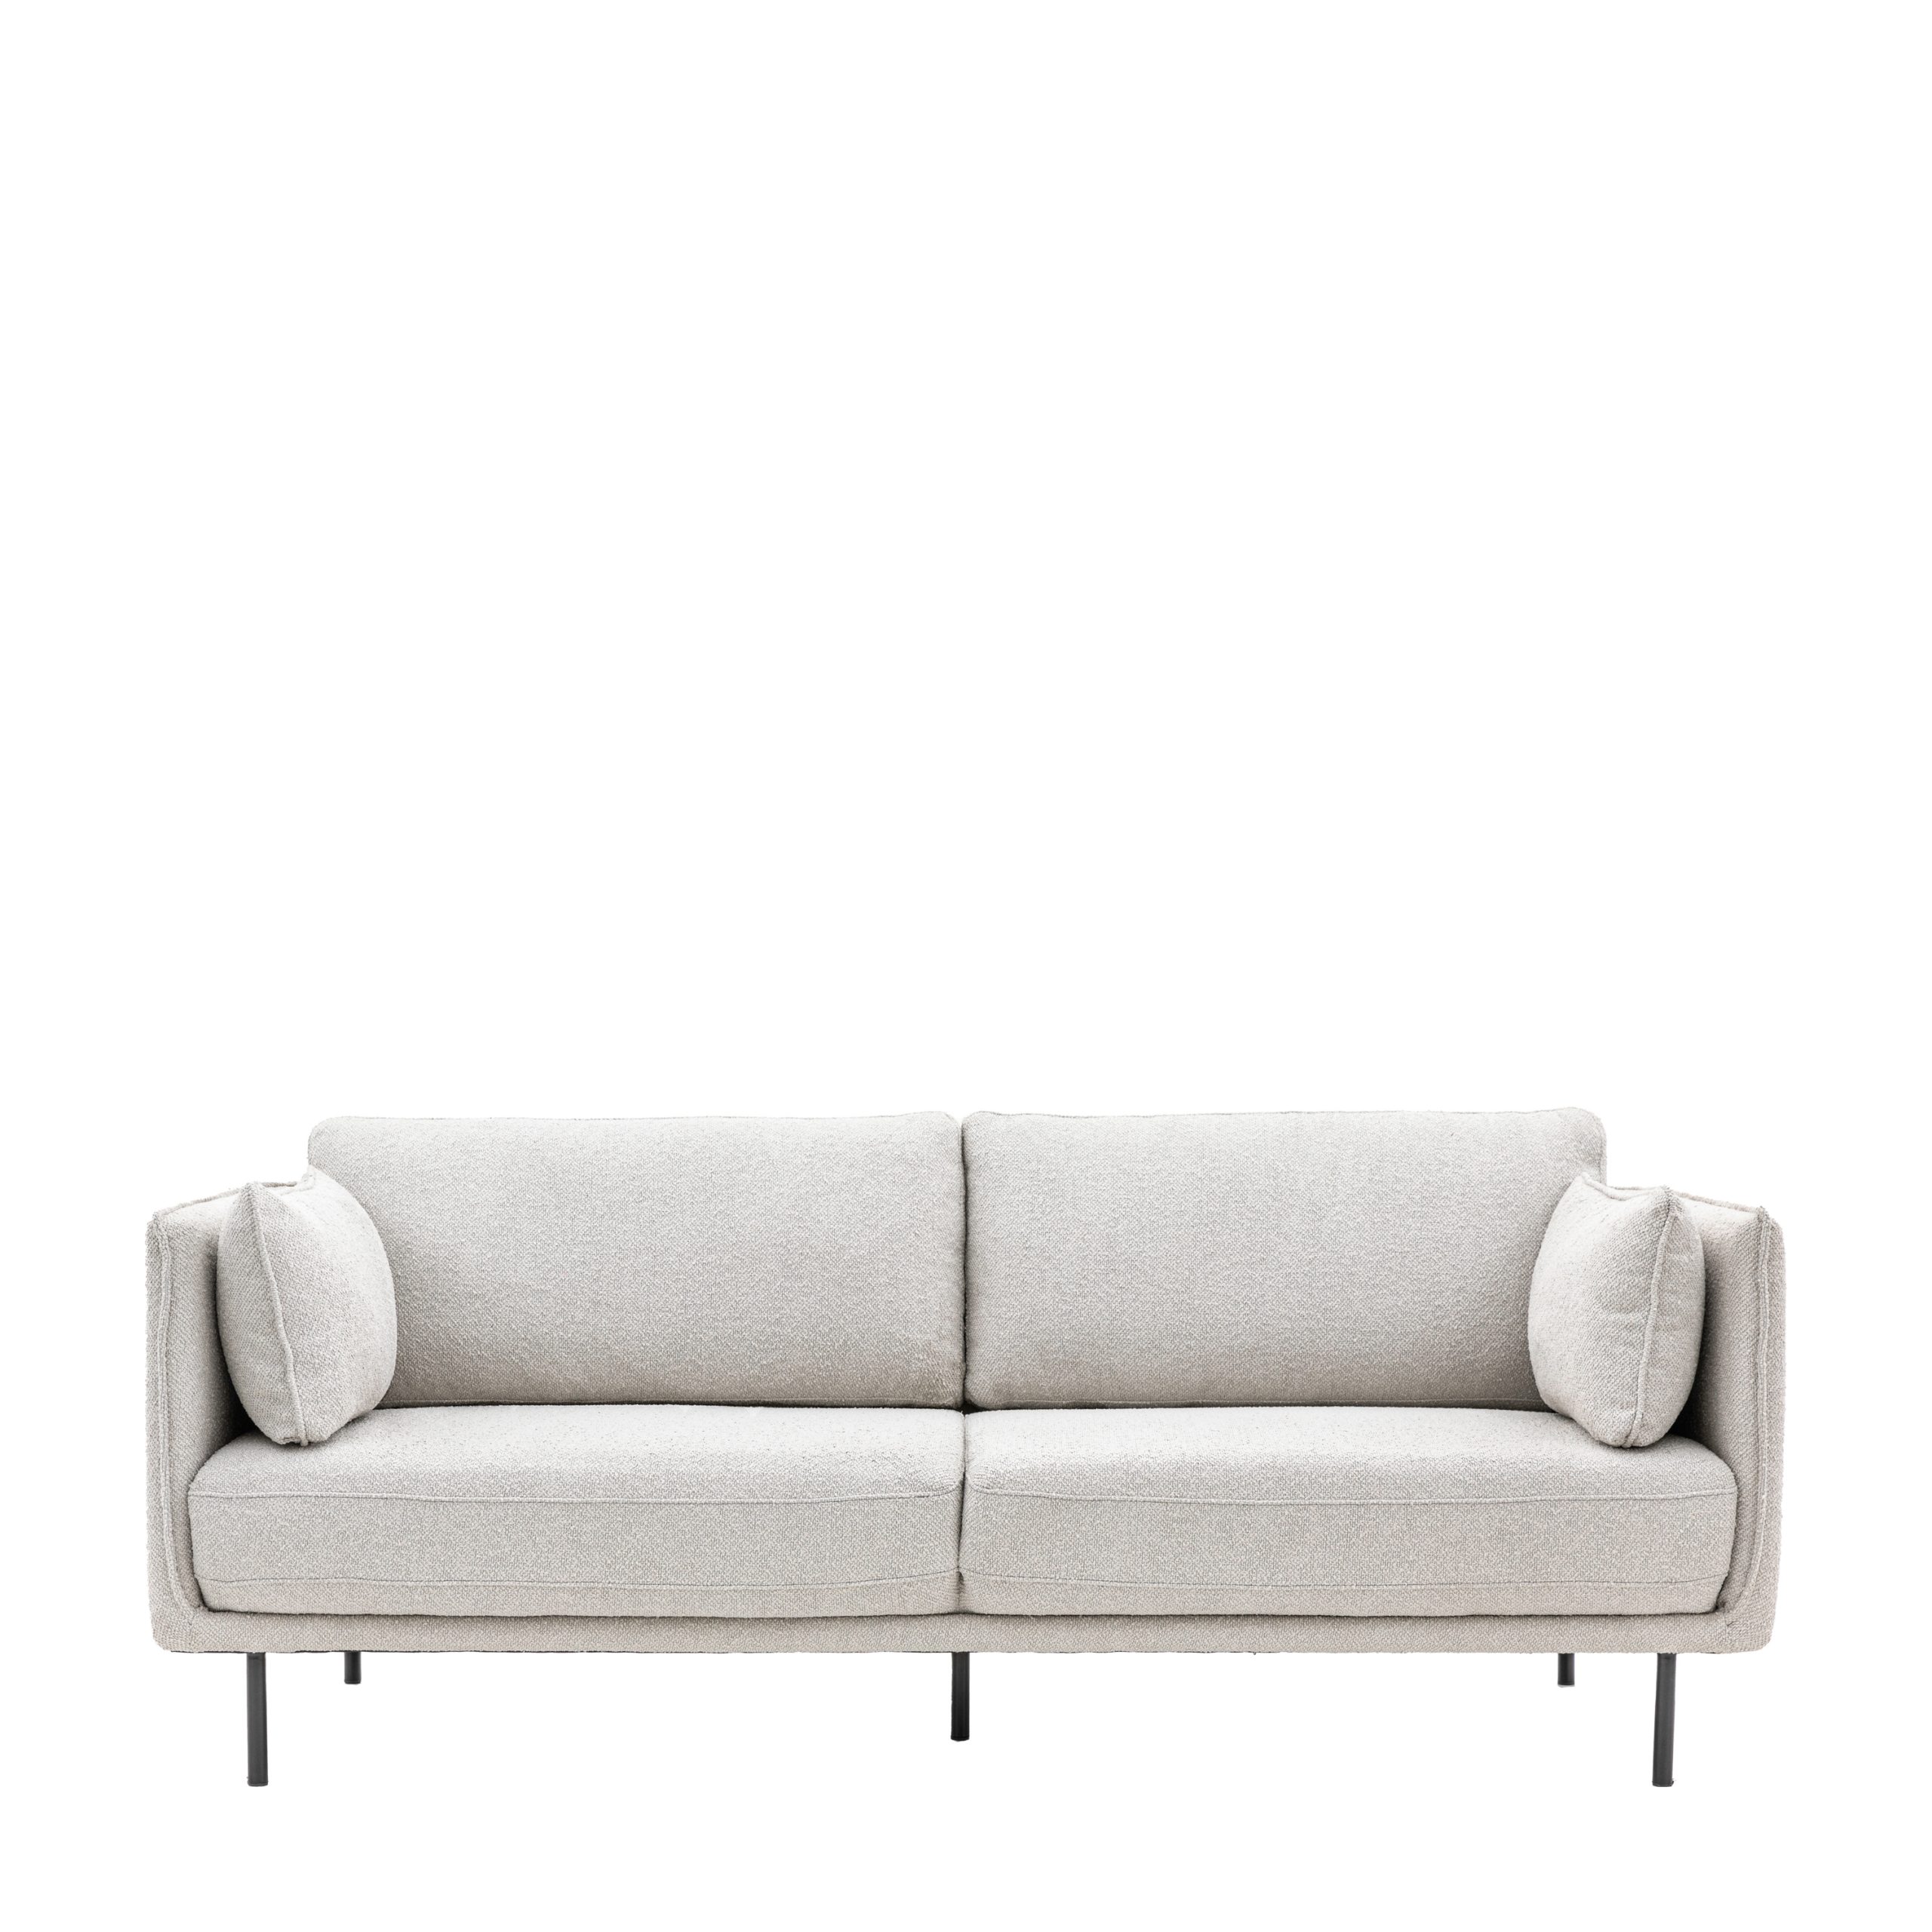 Gallery Direct Wigmore Sofa Cool Natural Boucle